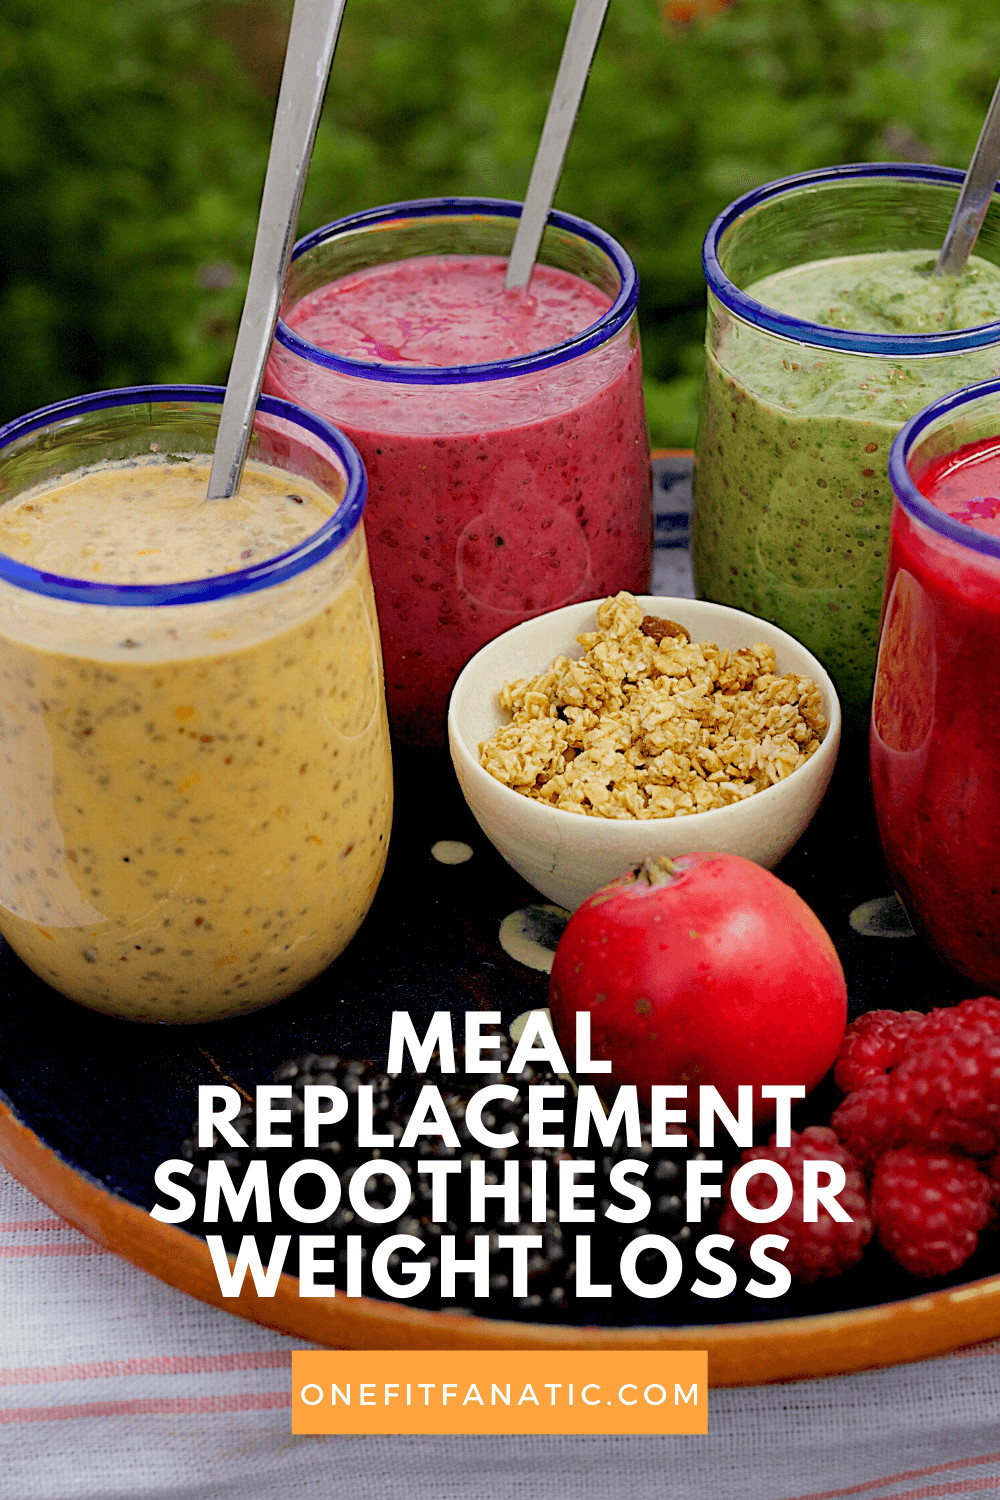 Meal Replacement Smoothies For Weight Loss
 The Best Meal Replacement Smoothies for Weight Loss